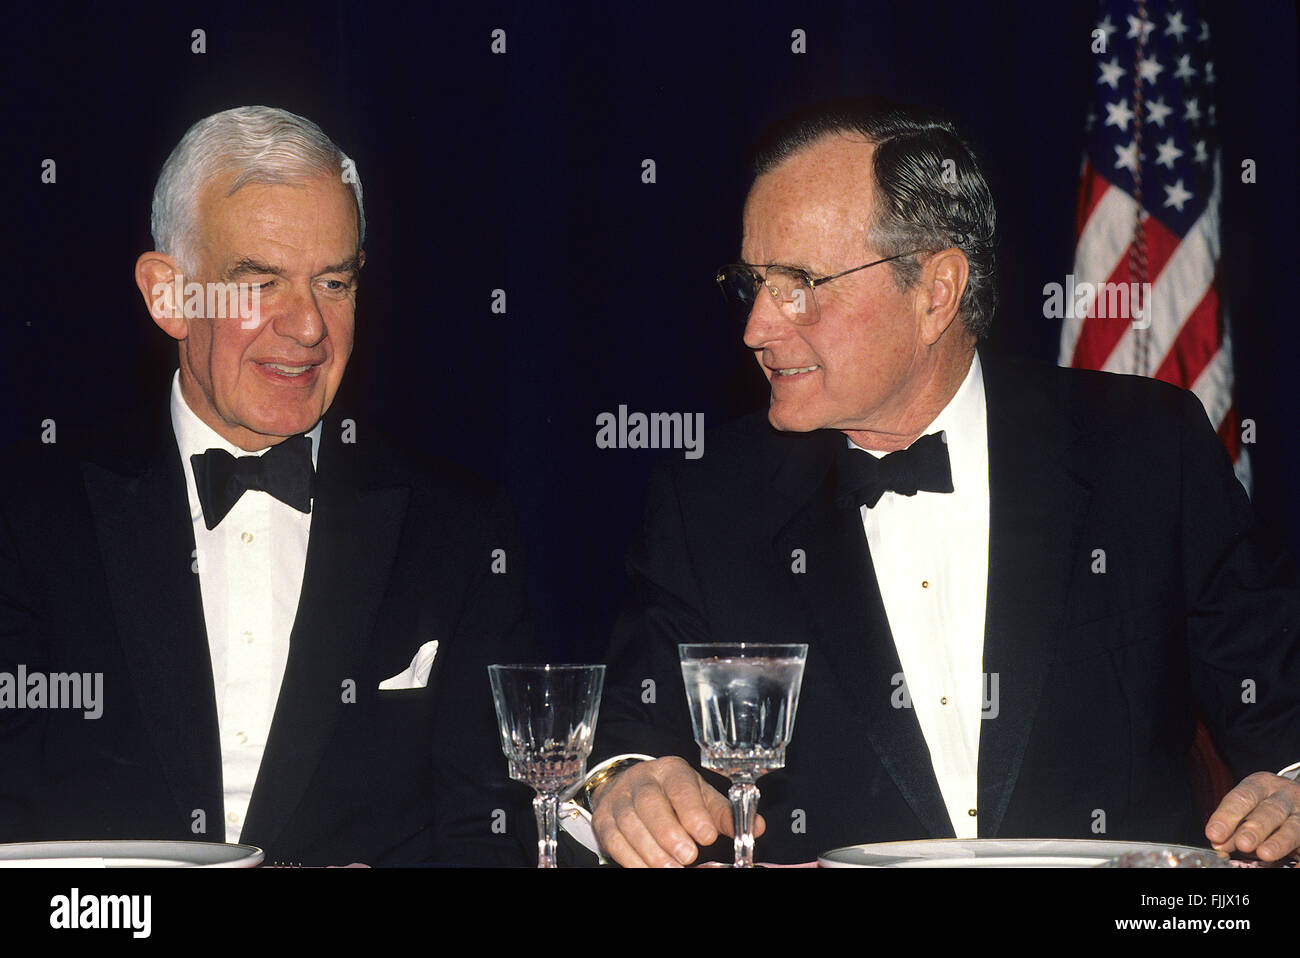 Washington, DC., USA, 2nd  May 1992 President George H.W. Bush dressed in Black Tie at the White House Correspondents dinner. Seated next to him is Speaker of the House Thomas Foley. Credit: Mark Reinstein. Stock Photo